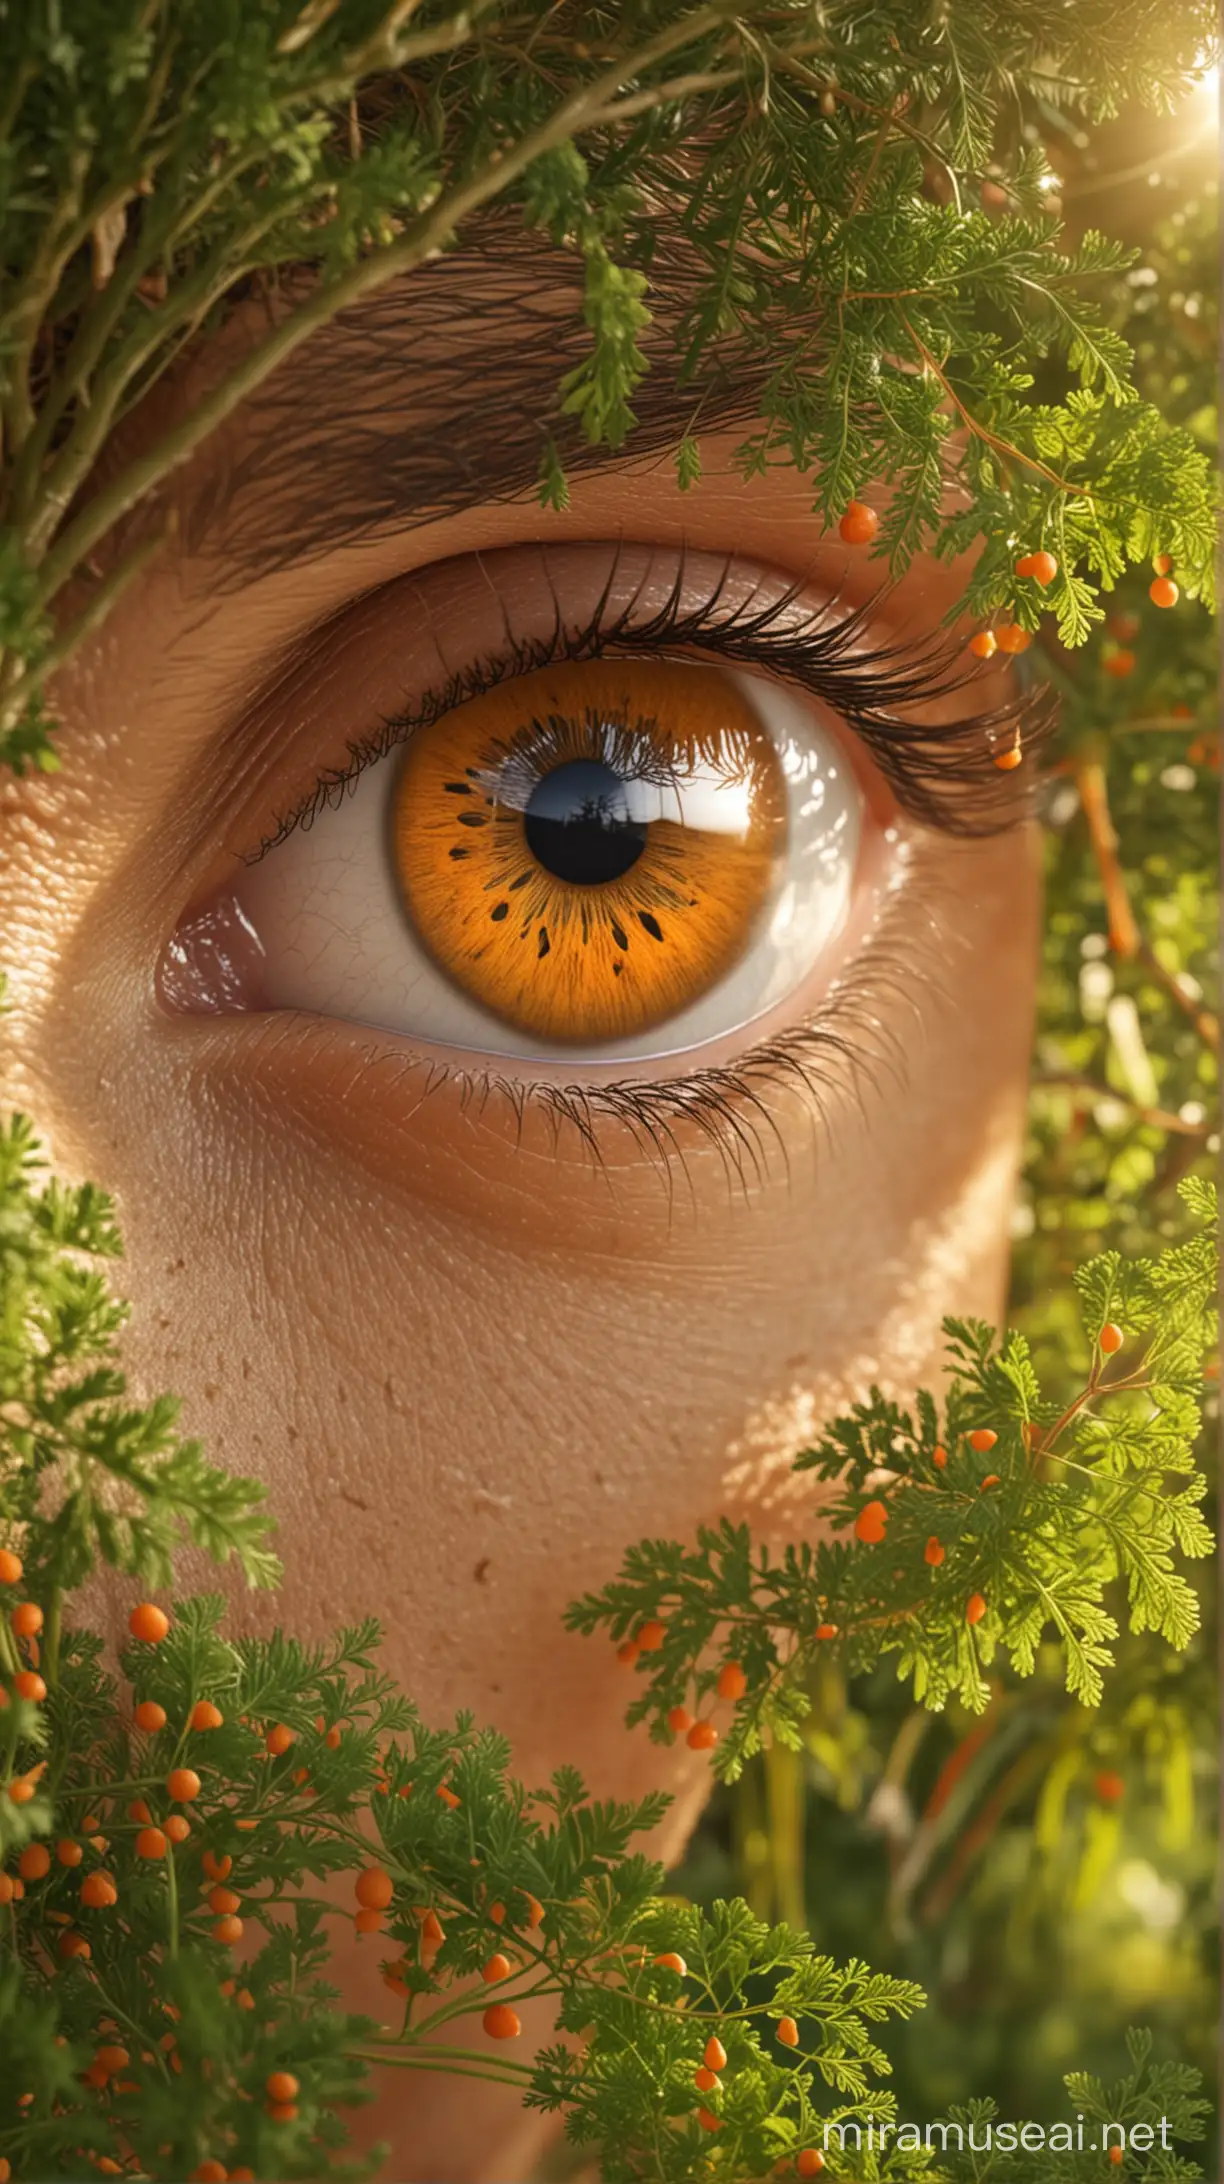 Detailed Eyes Diagram with Carrot Tree Background in Morning Sunlight